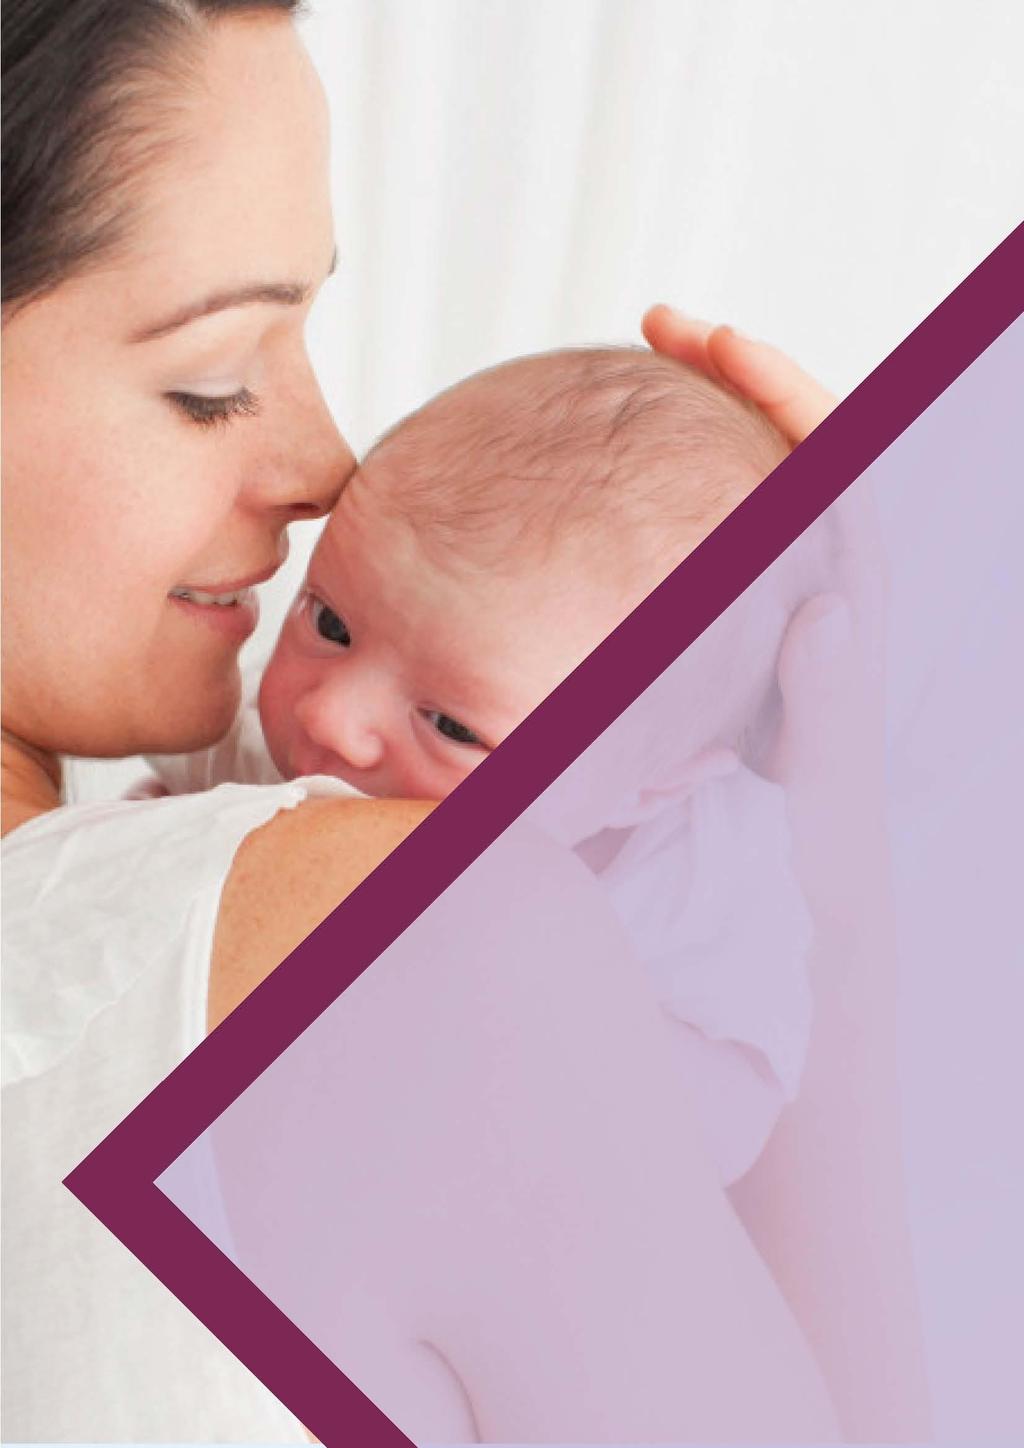 Mental health service for new mums During the year we commissioned a new community-based Specialist Perinatal Mental Health Service (SPMHS) for mums with severe mental health difficulties either now